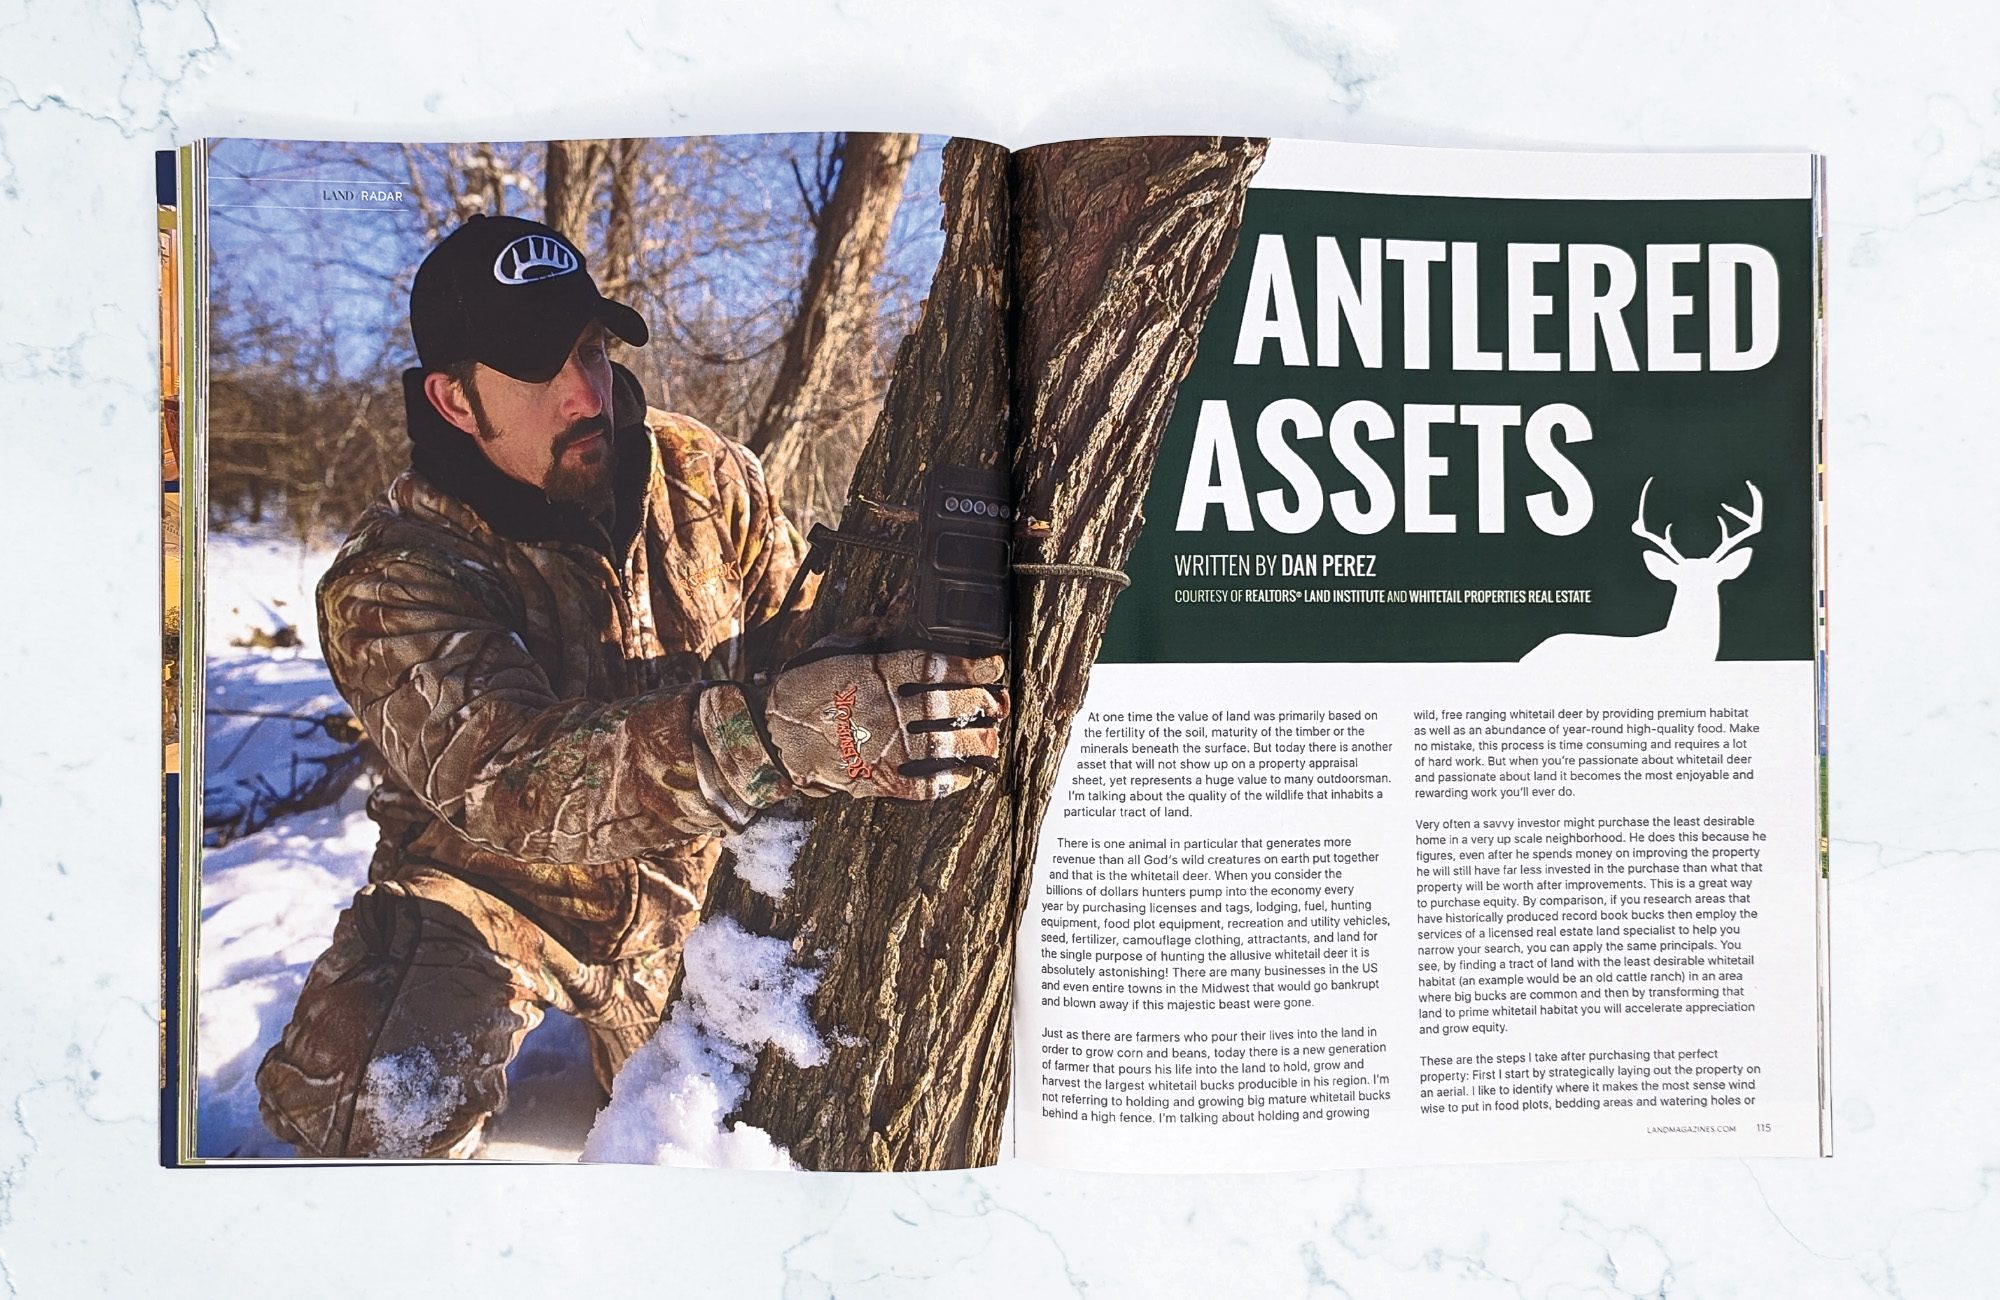 A magazine on a light marbled surface open to an editorial titled Antlered Assets. on the left is a picture of a bearded man in camo attire who is setting up a survey camera on a tree while kneeling in the snow. The tree juts out diagonally into the right page where the text for the editorial starts.